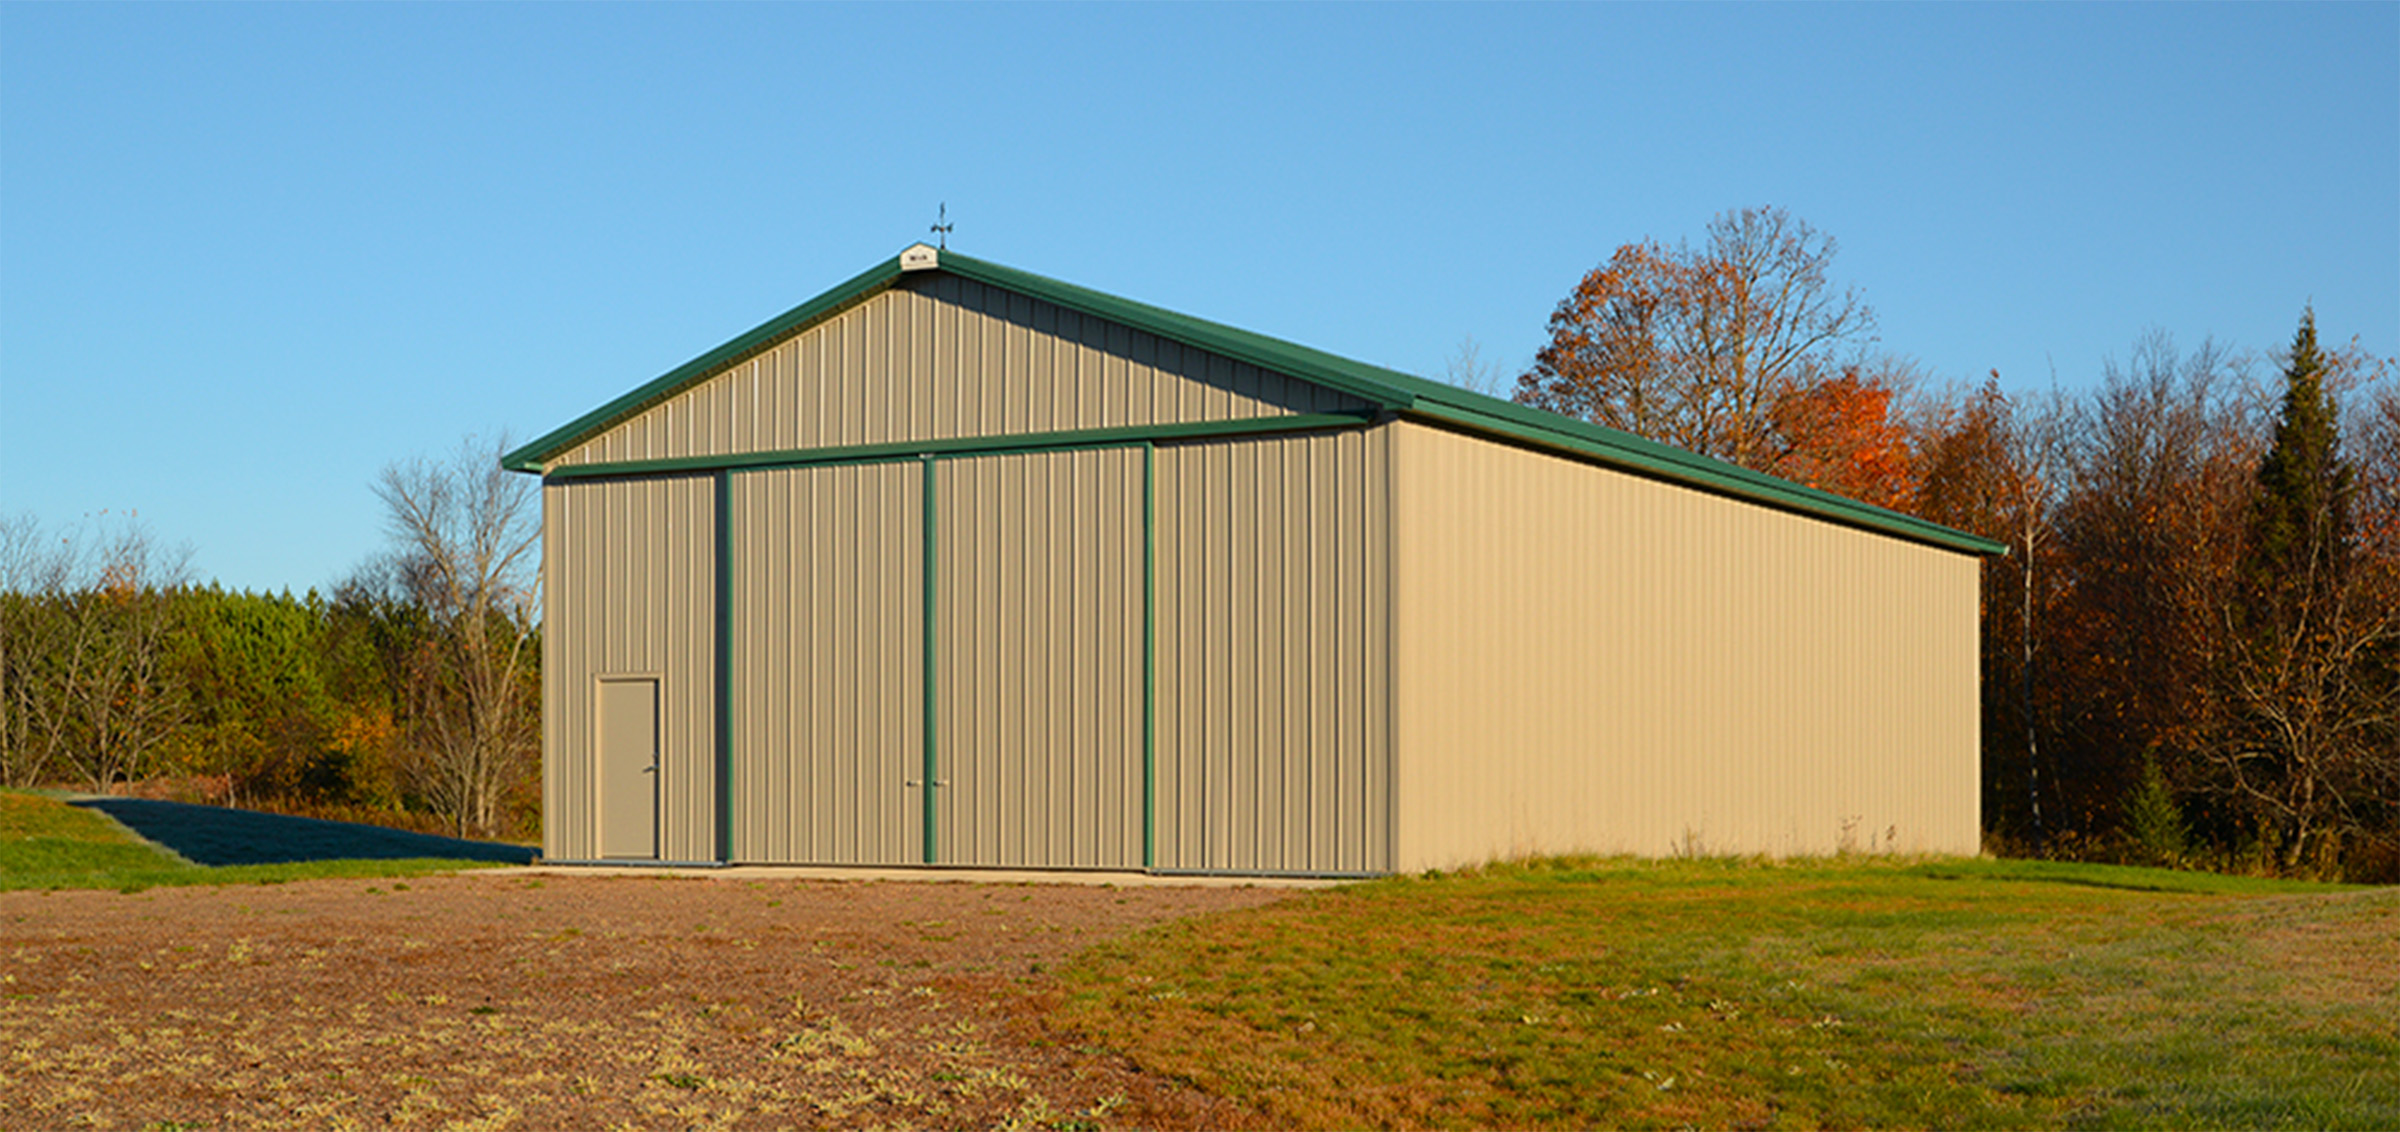 beige and green colored post frame agricultural building